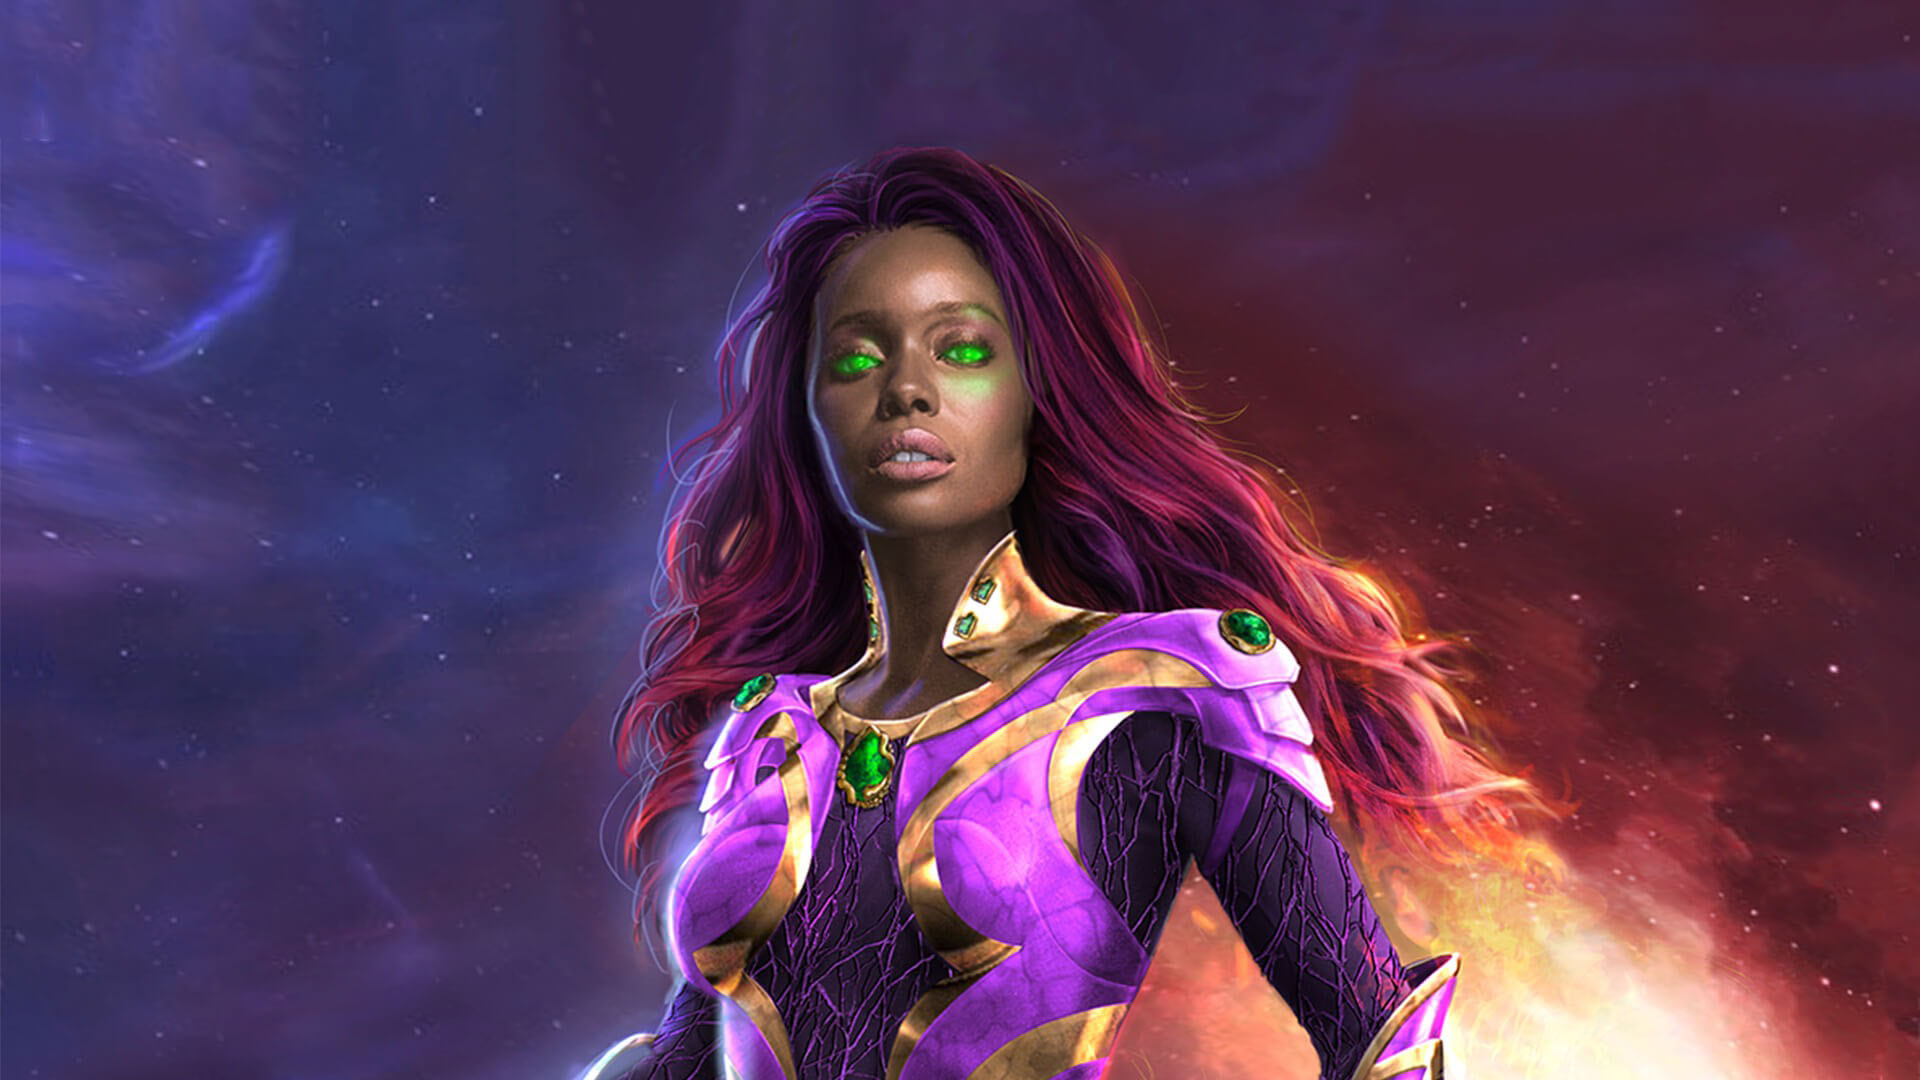 Starfire (Princess Koriand'r) is a fictional superhero appearing in books published by DC Comics. She debuted in a preview st...